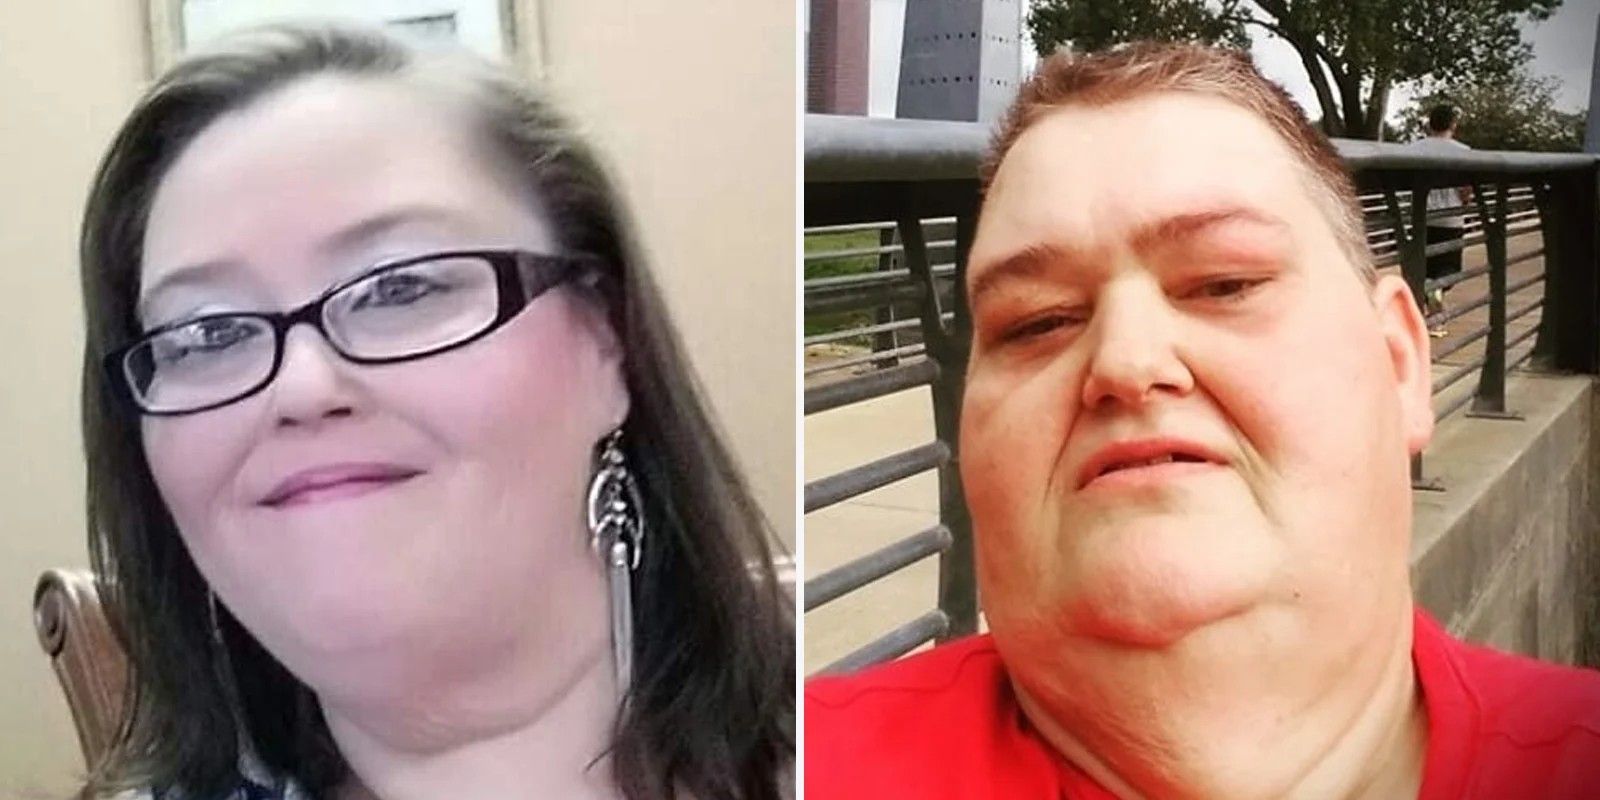 lee rena my 600 lb life CROPPED side by side image